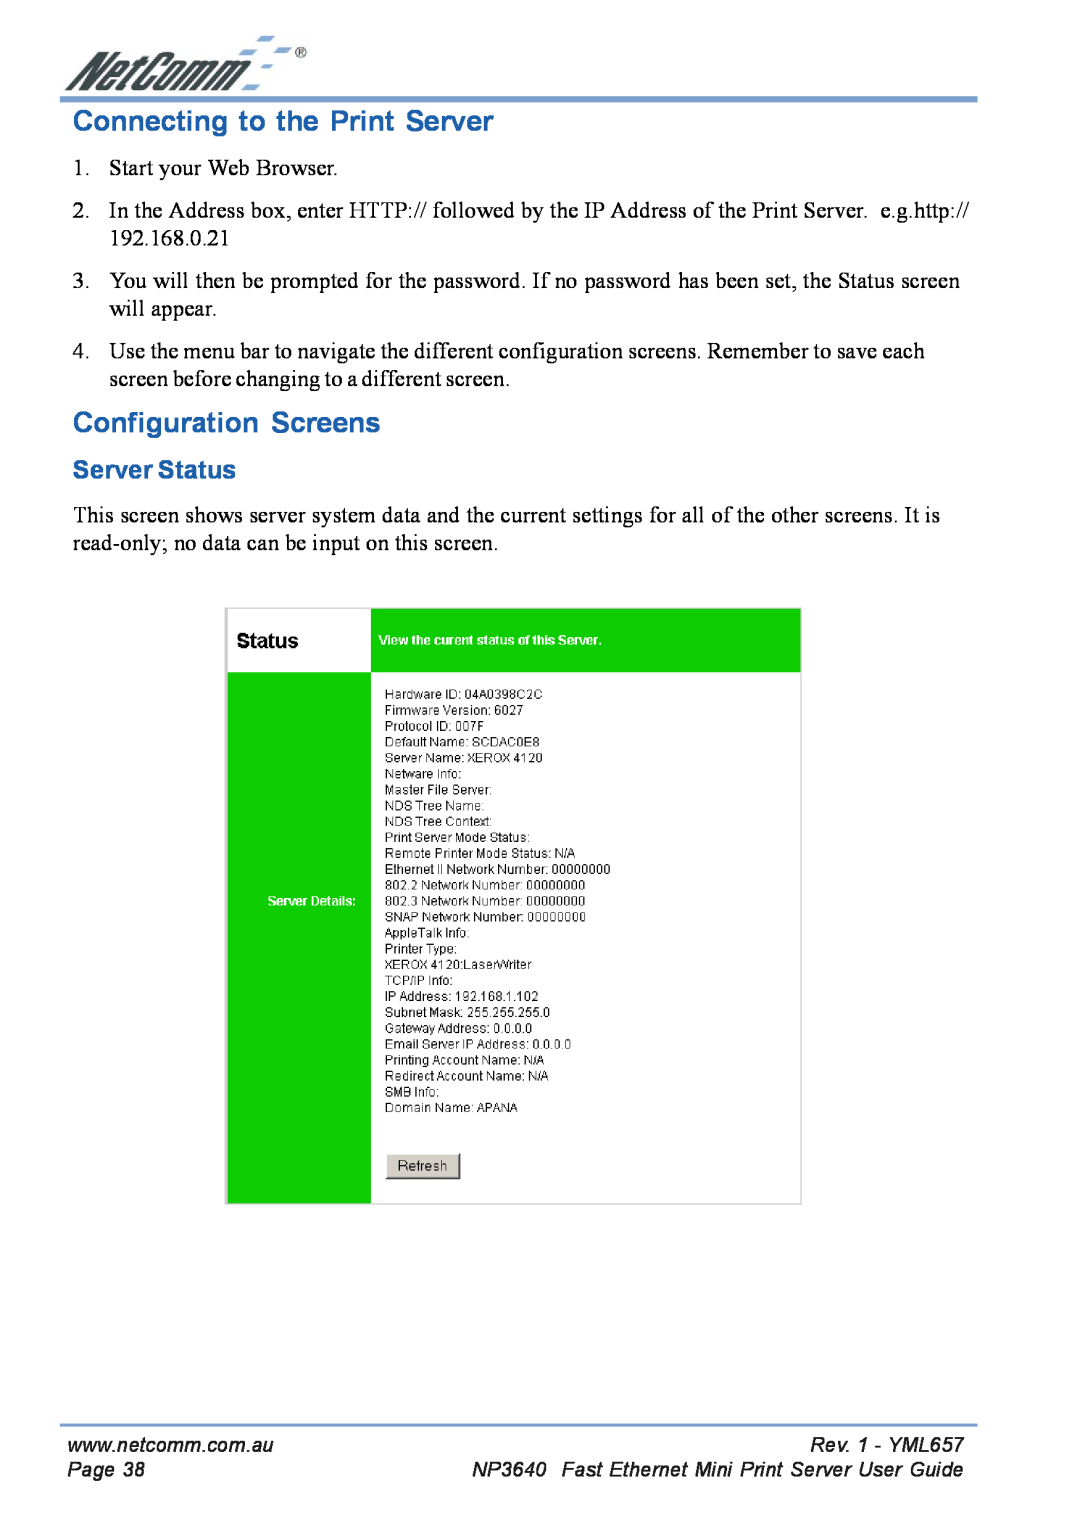 NetComm NP3640 manual Connecting to the Print Server, Configuration Screens, Server Status 